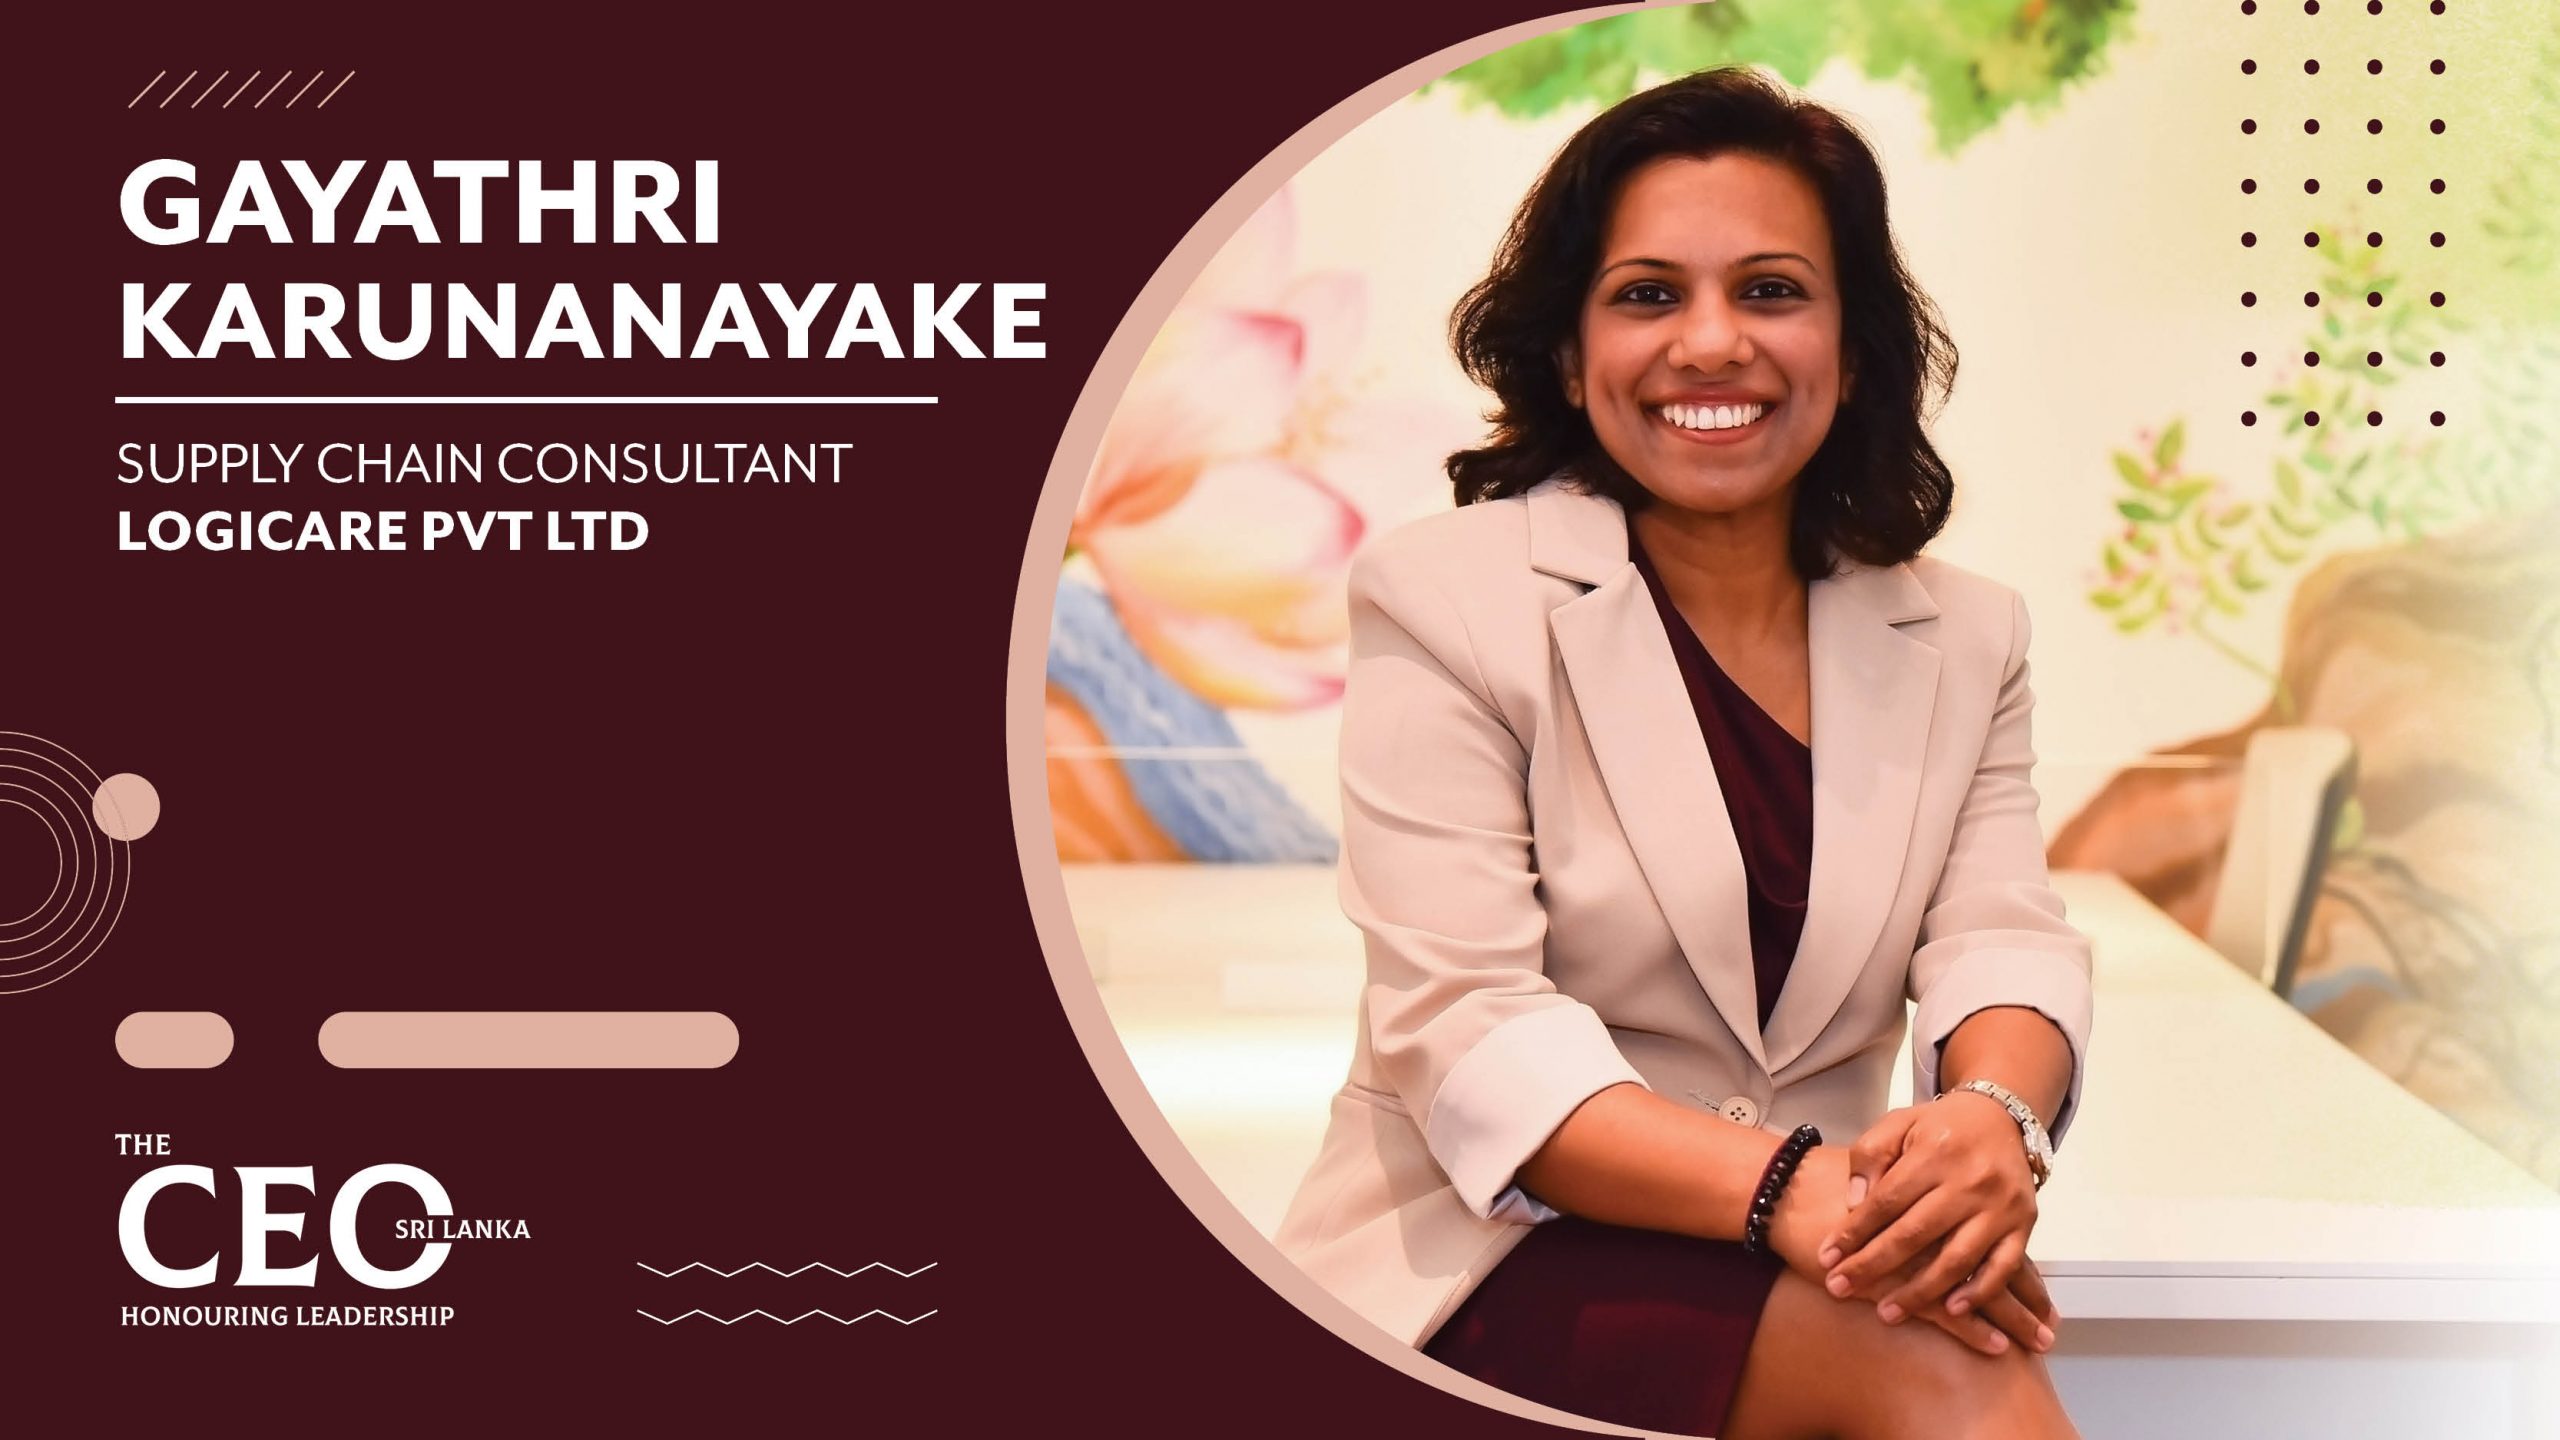 Seizing Opportunities to Empower – Supply Chain Consultant at Logicare Pvt Ltd, Gayathri Karunanayake